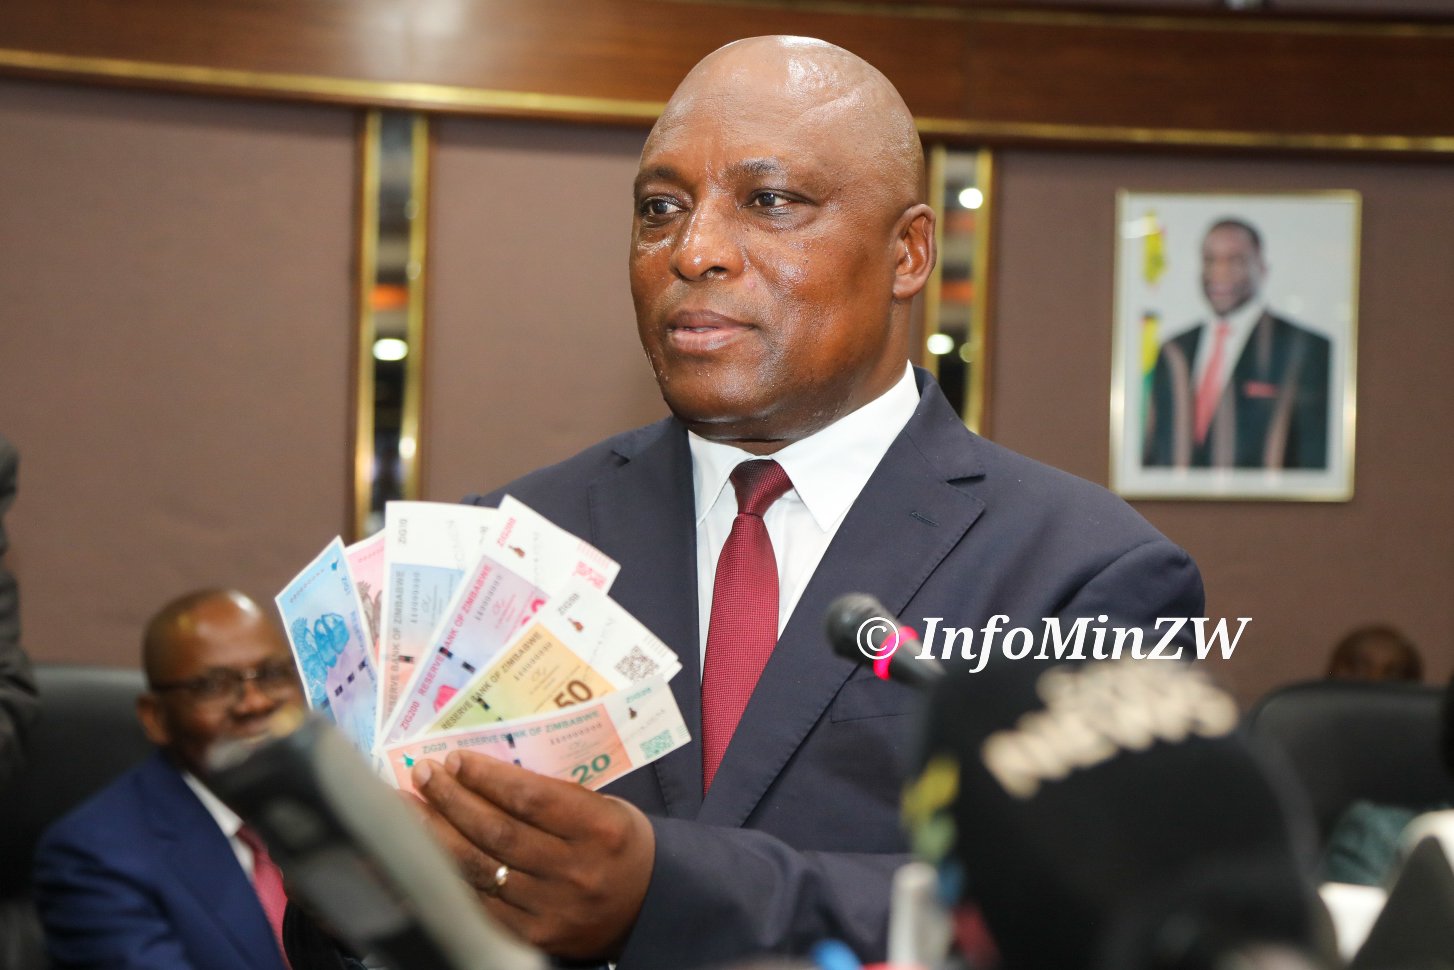 EXCHANGE RATE: Zimbabwe Monetary Policy Statement, RBZ Unveils ZiG Currency, Trading Rate to US$